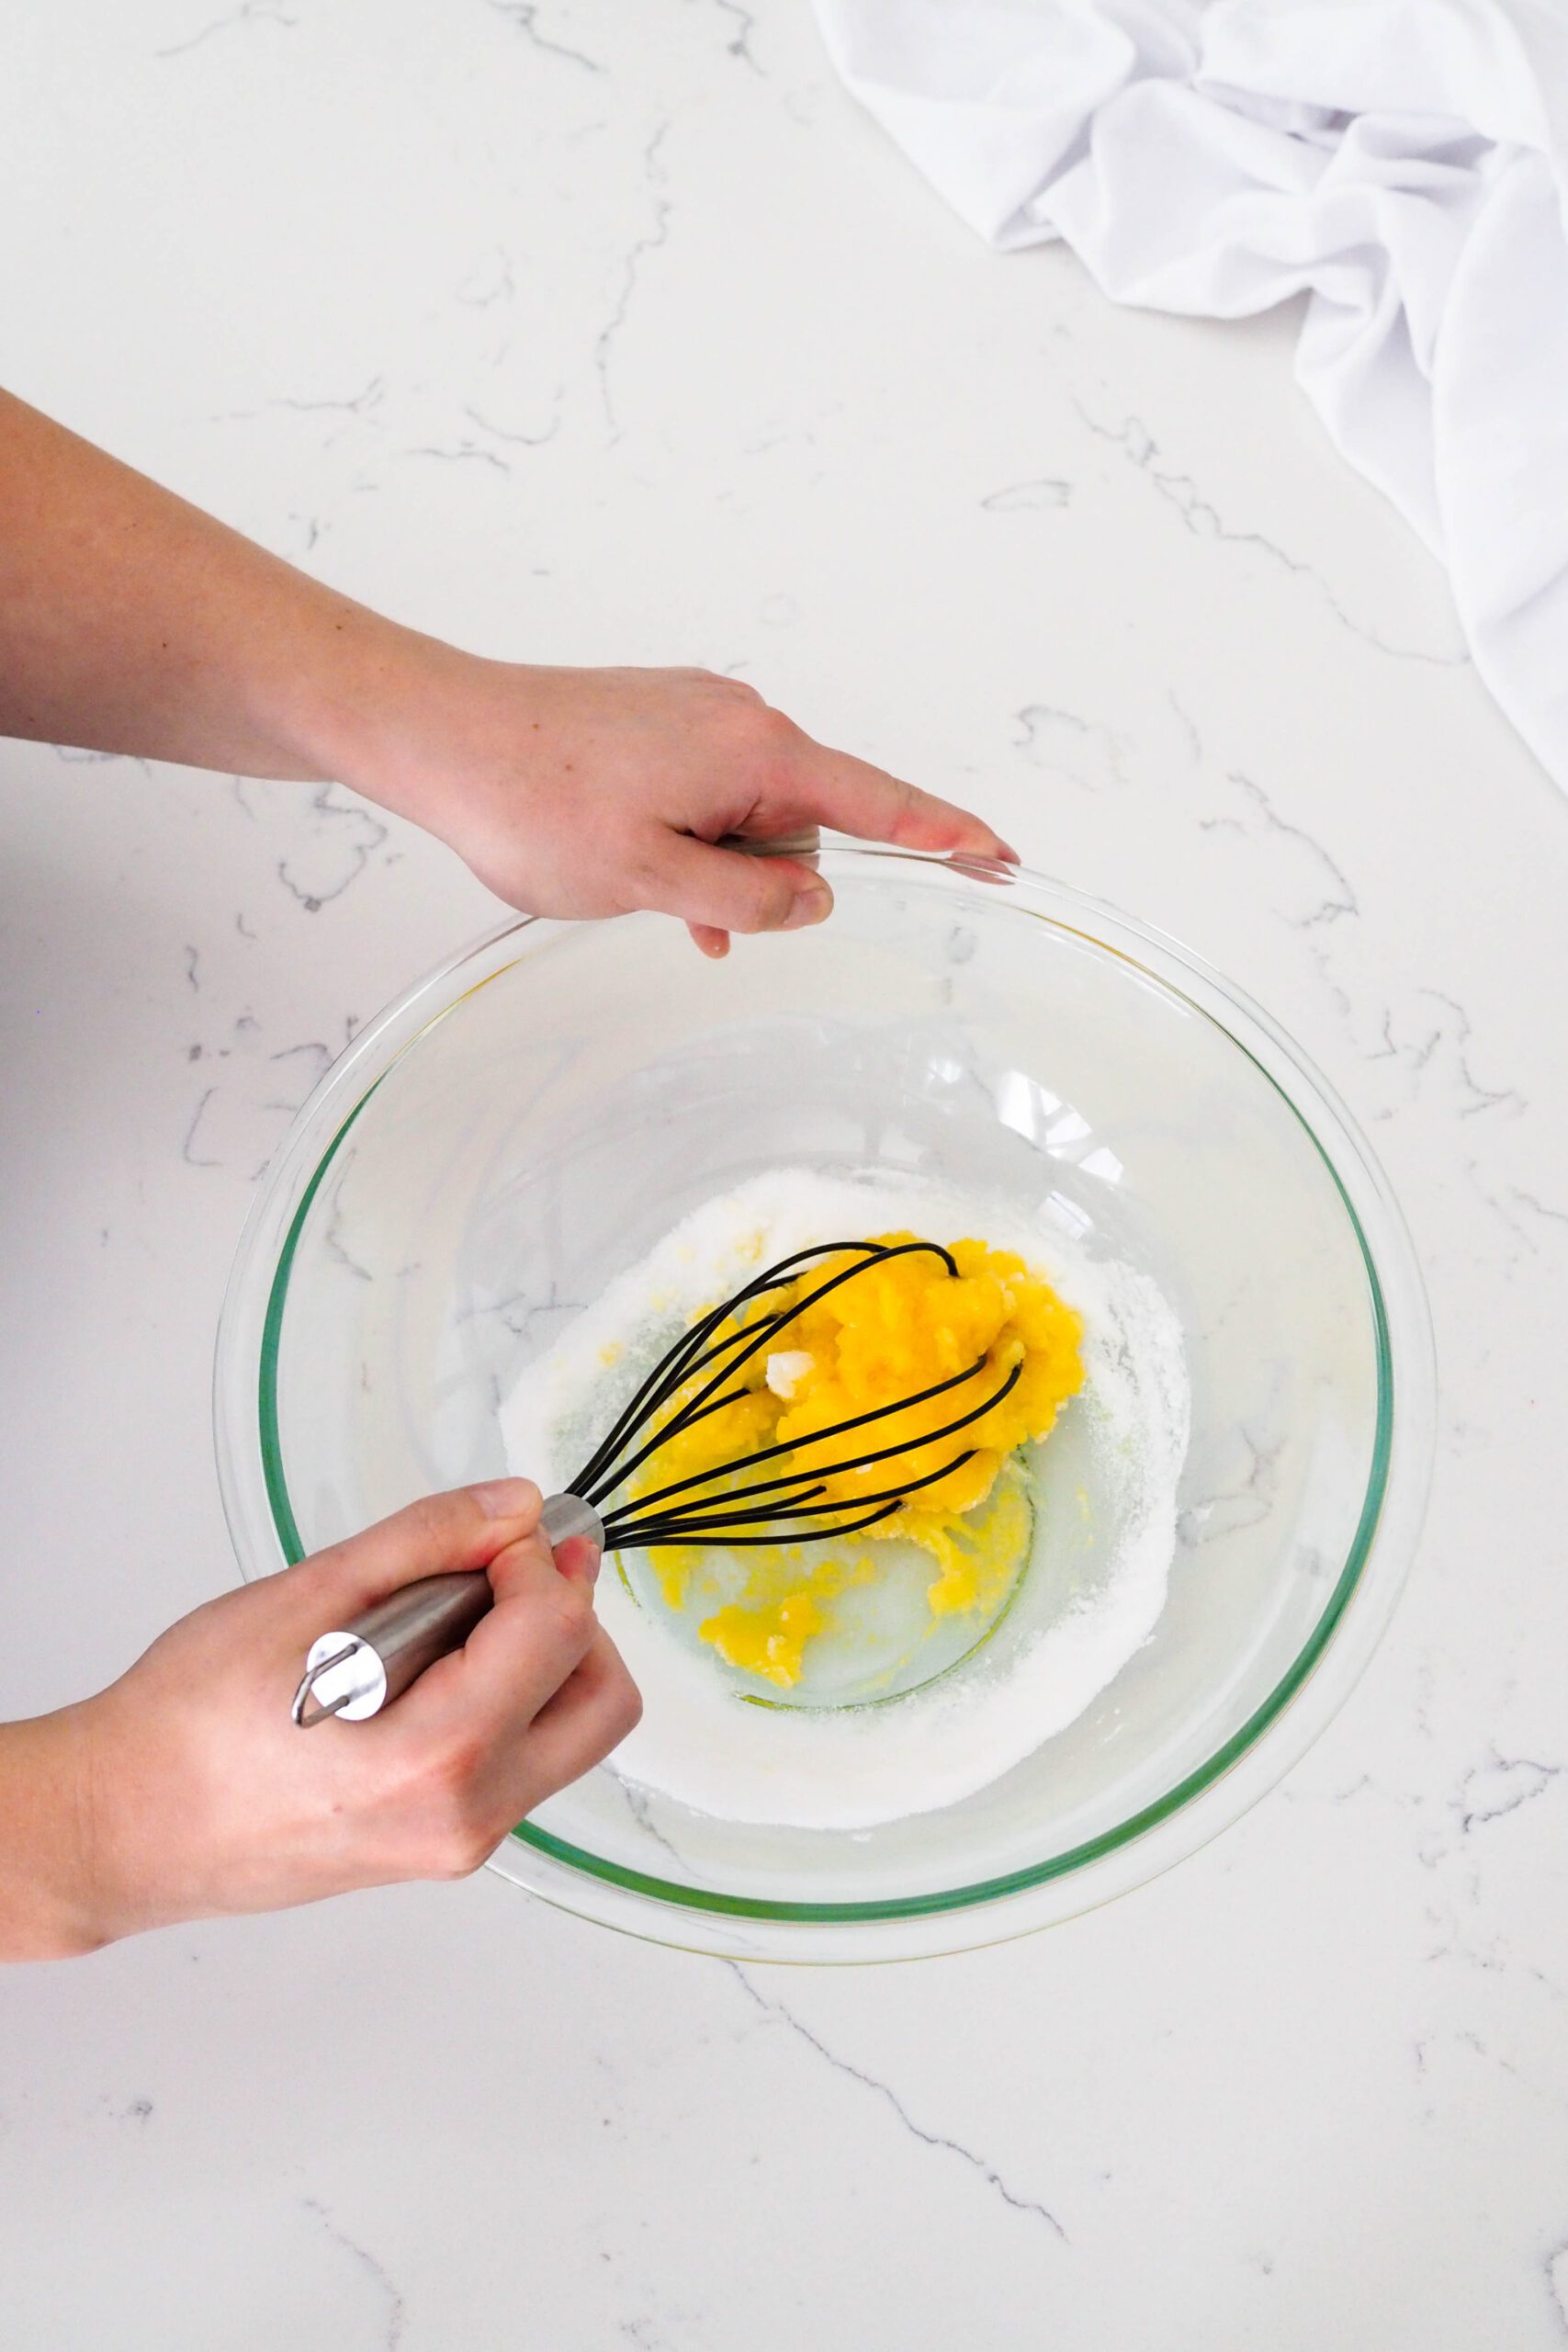 Two hands whisk together a dense and bright yellow mixture of egg yolks and sugar.